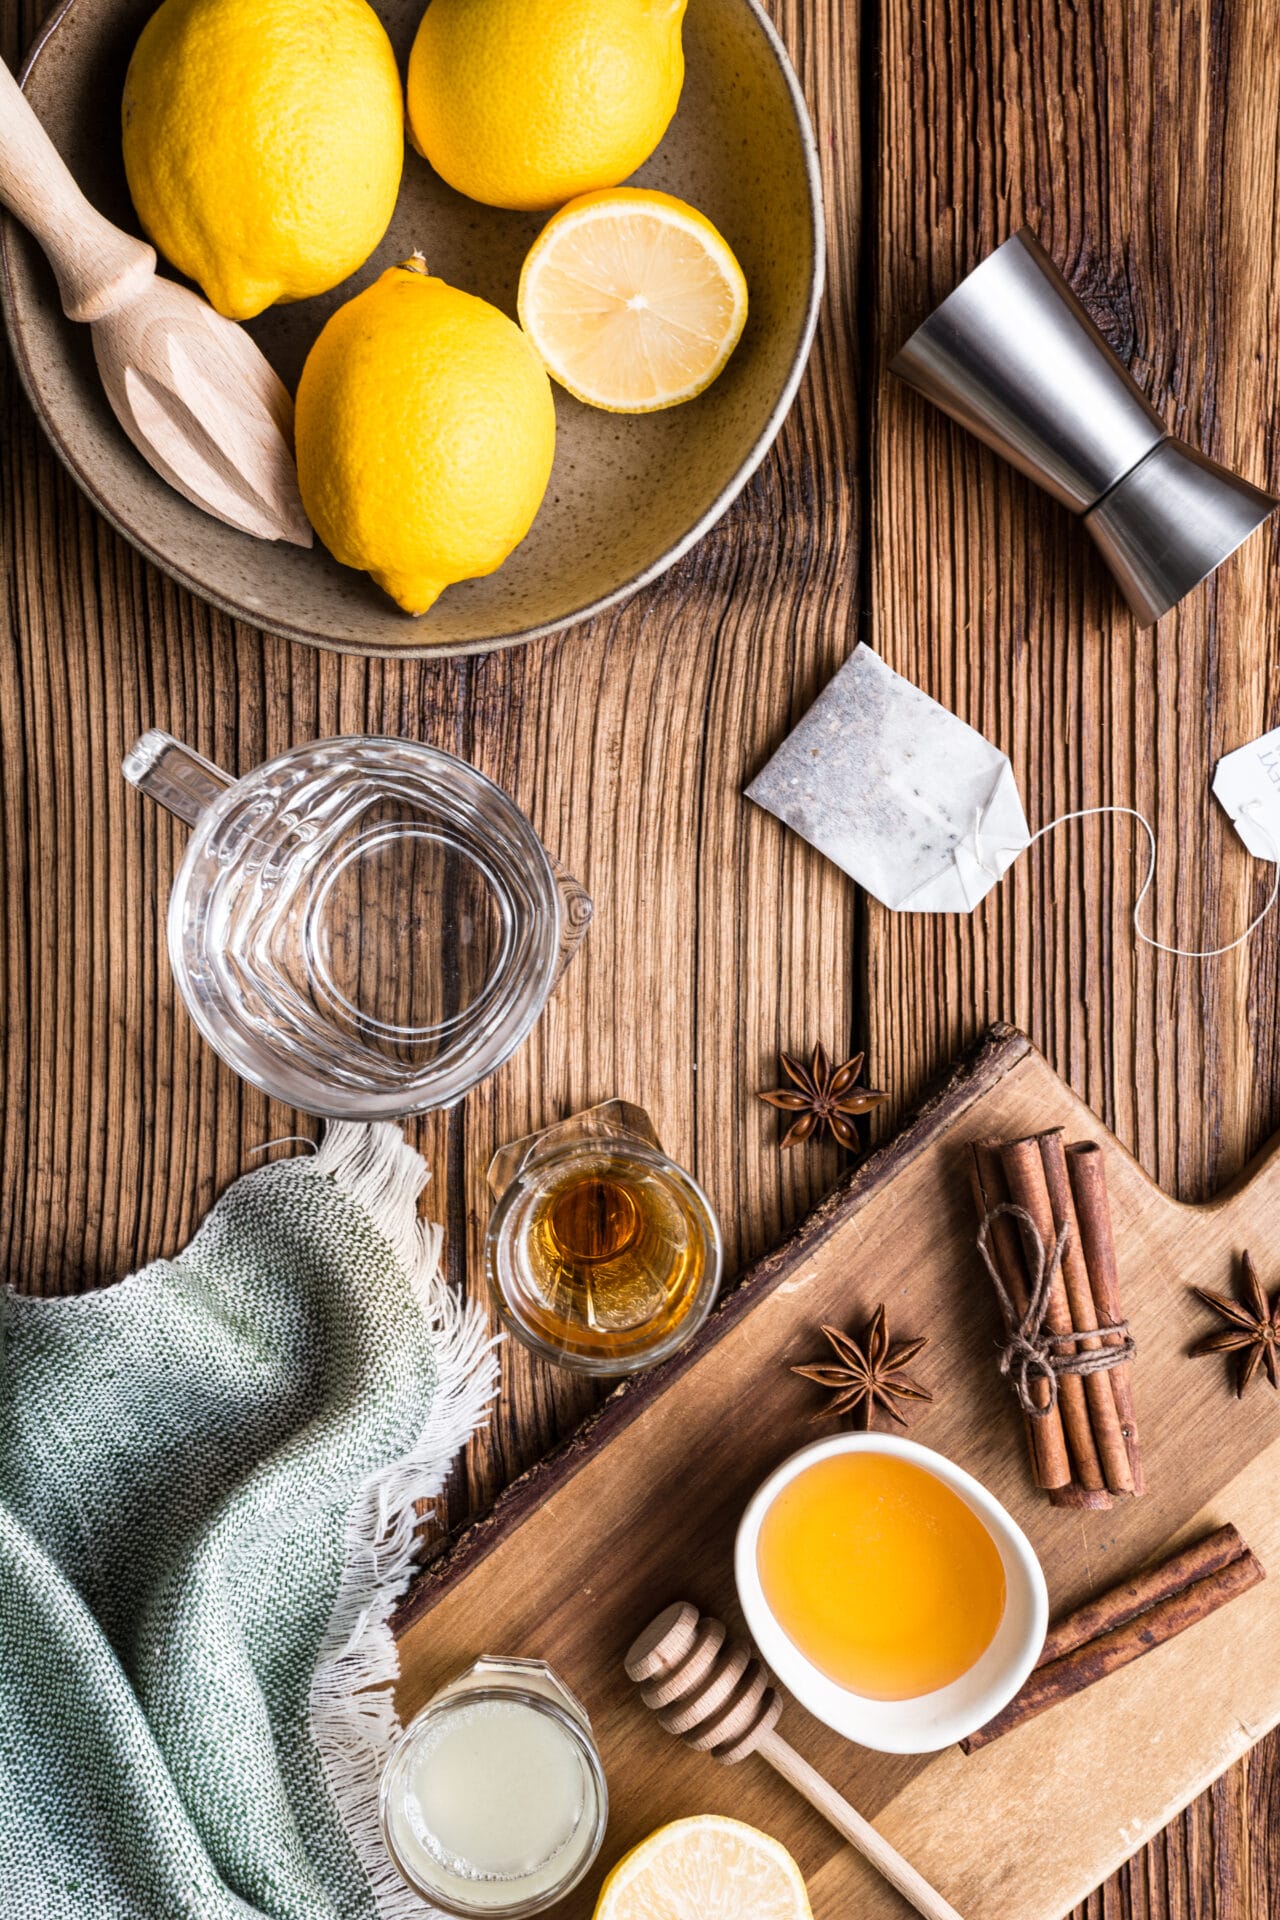 Classic Hot Toddy Recipe ingredients